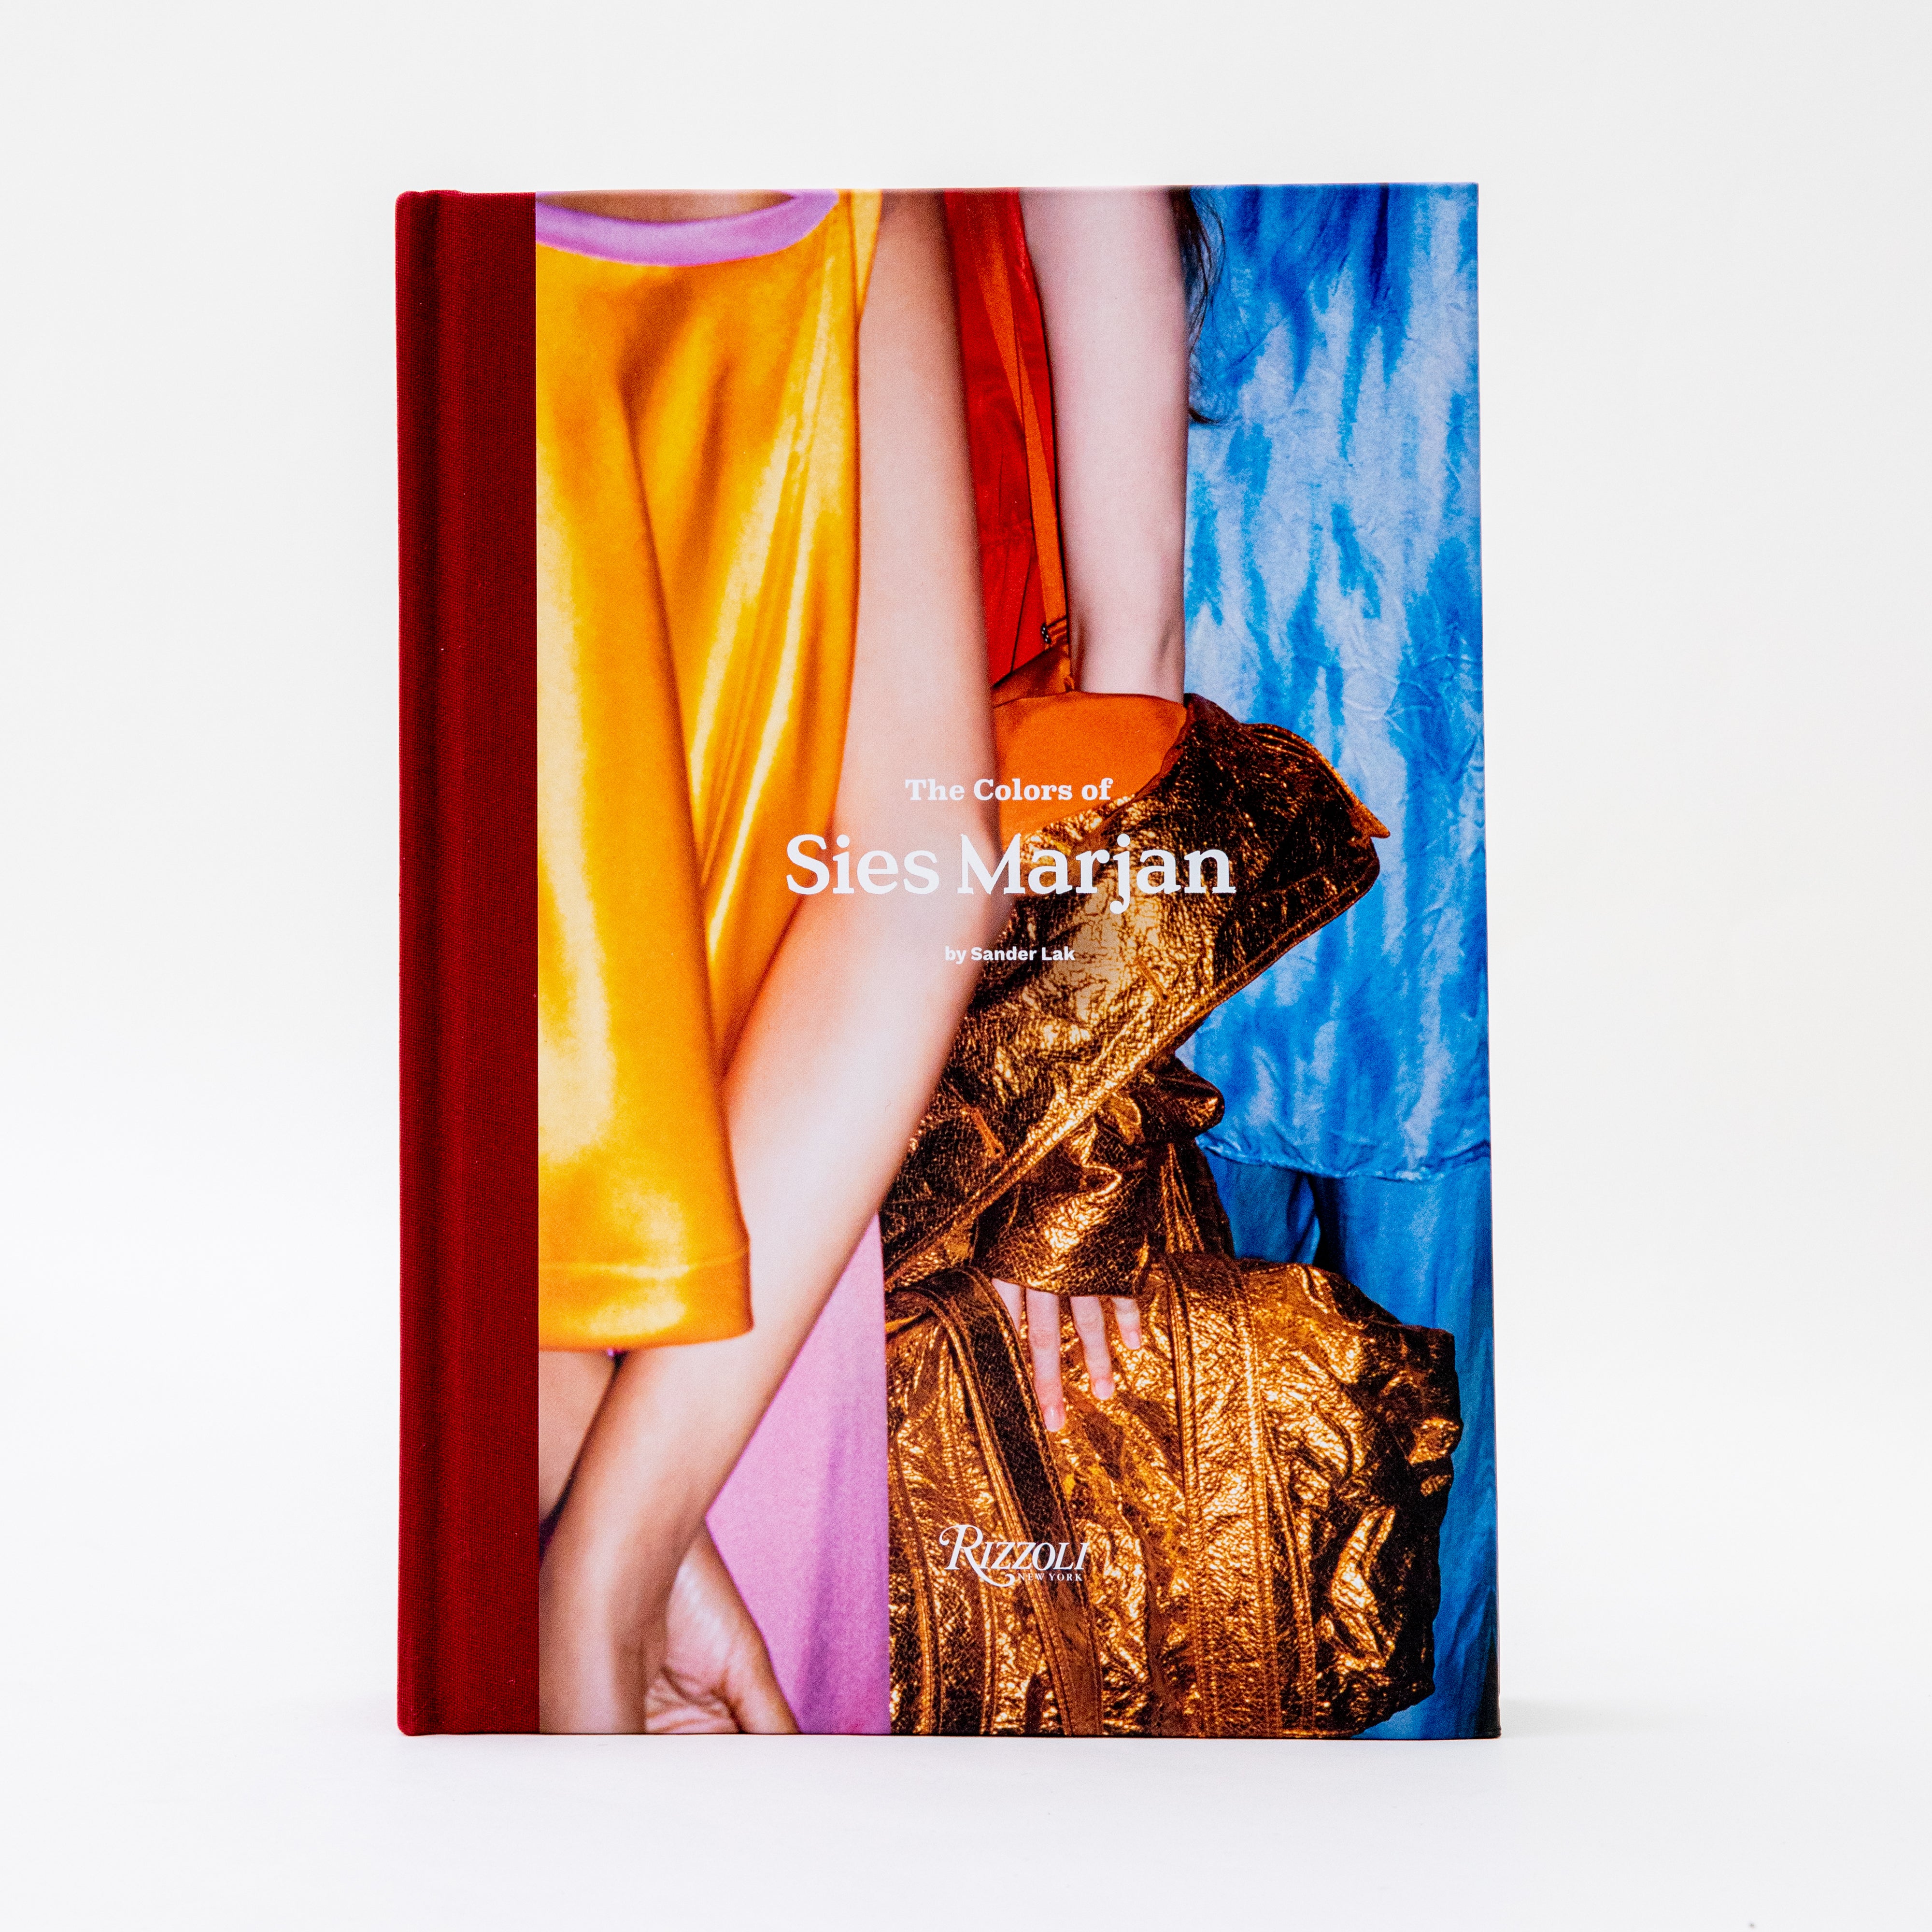 Sander Lak's The Colors of Sies Marjan, book cover image featuring a red binding, and a partial photograph of a model wearing a yellow satin skirt and carrying a metallic gold jacket and bag.